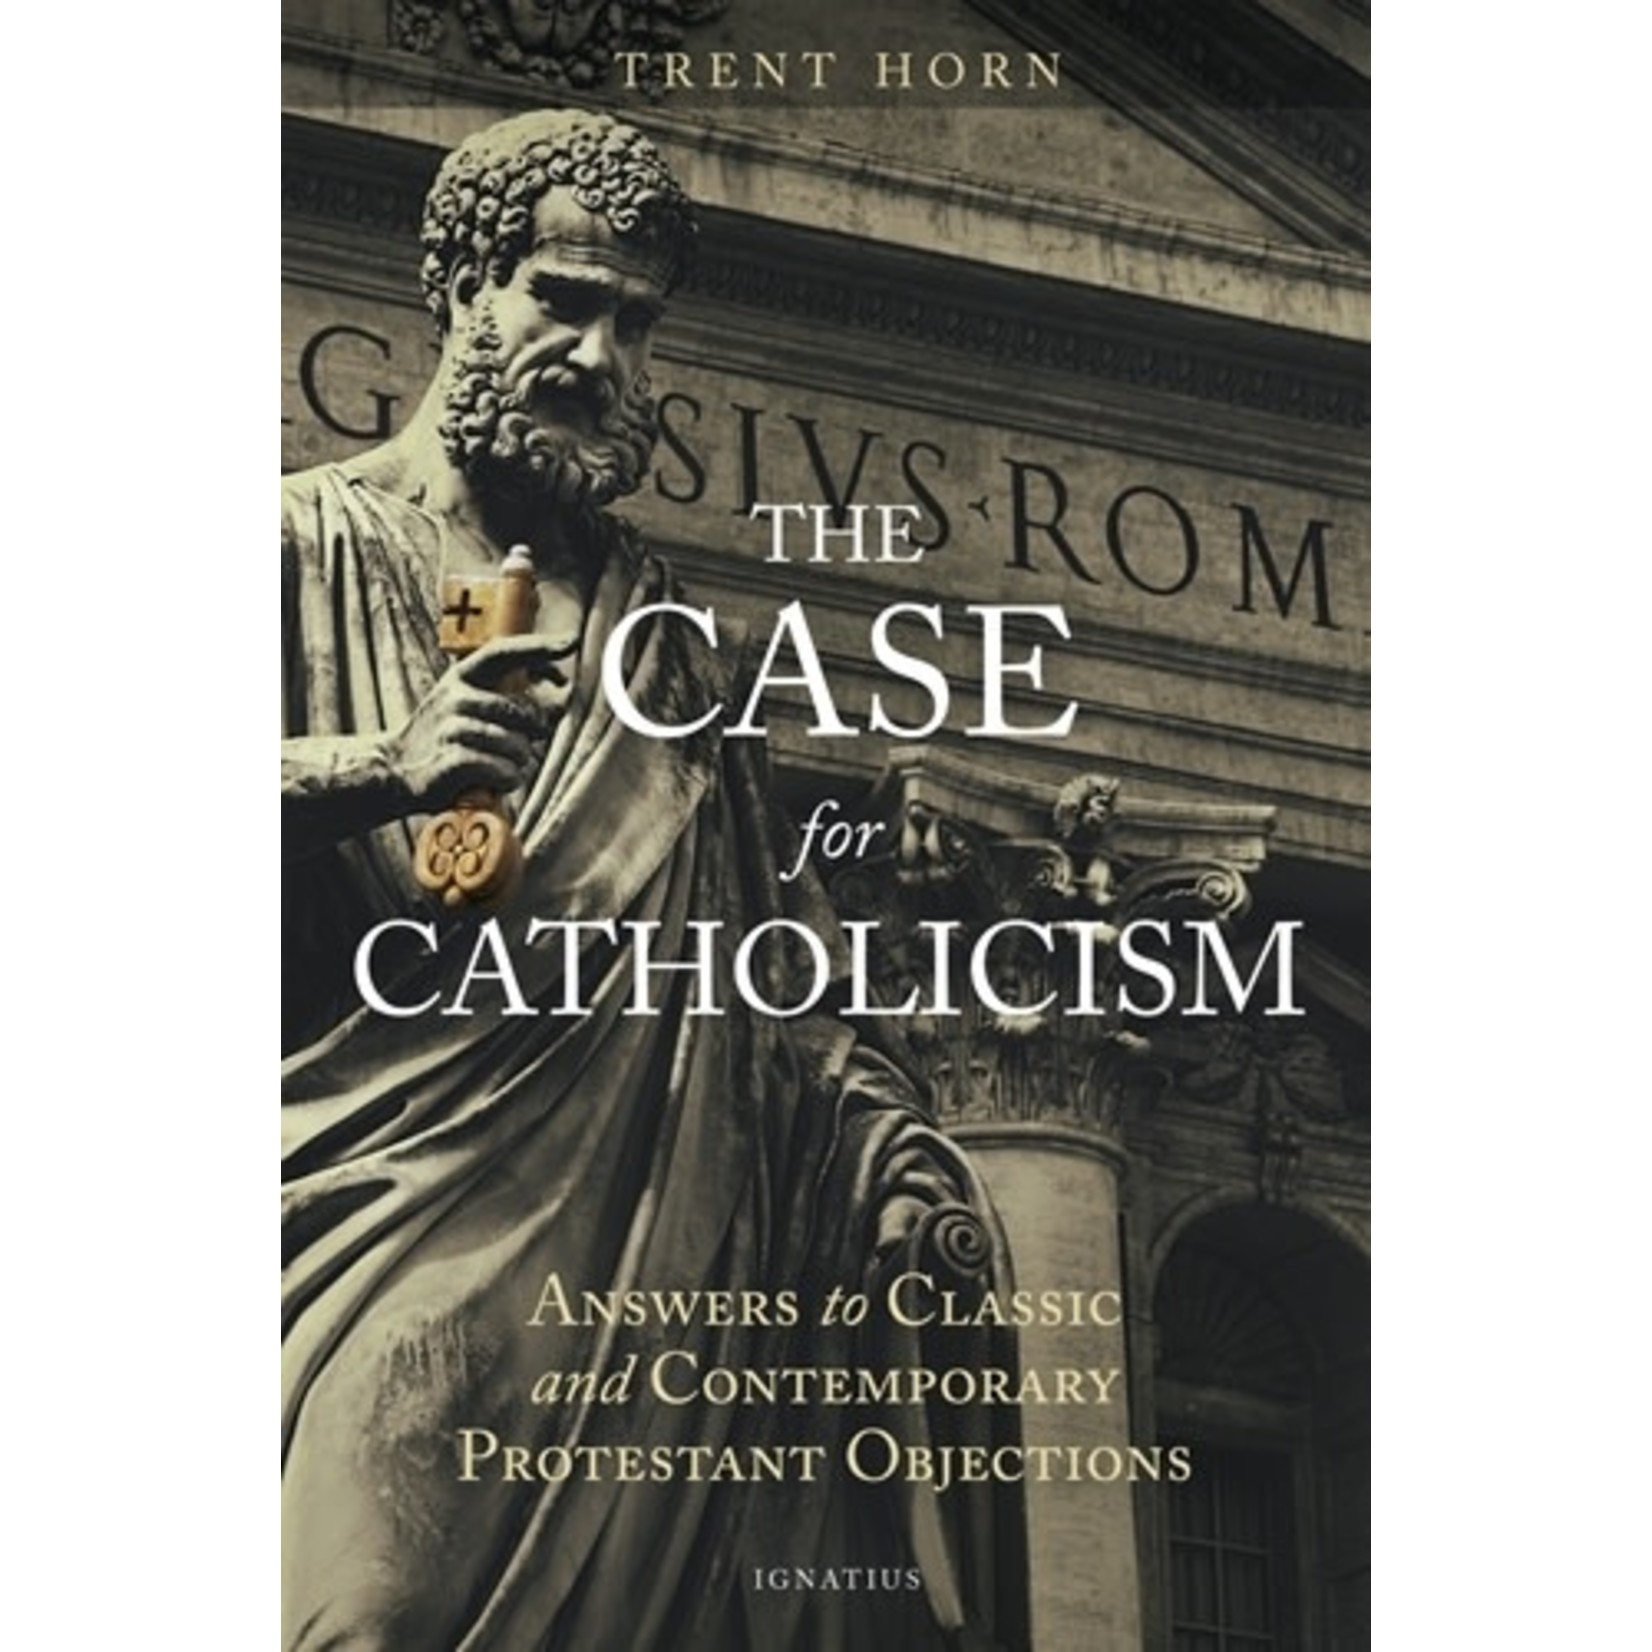 The Case for Catholicism